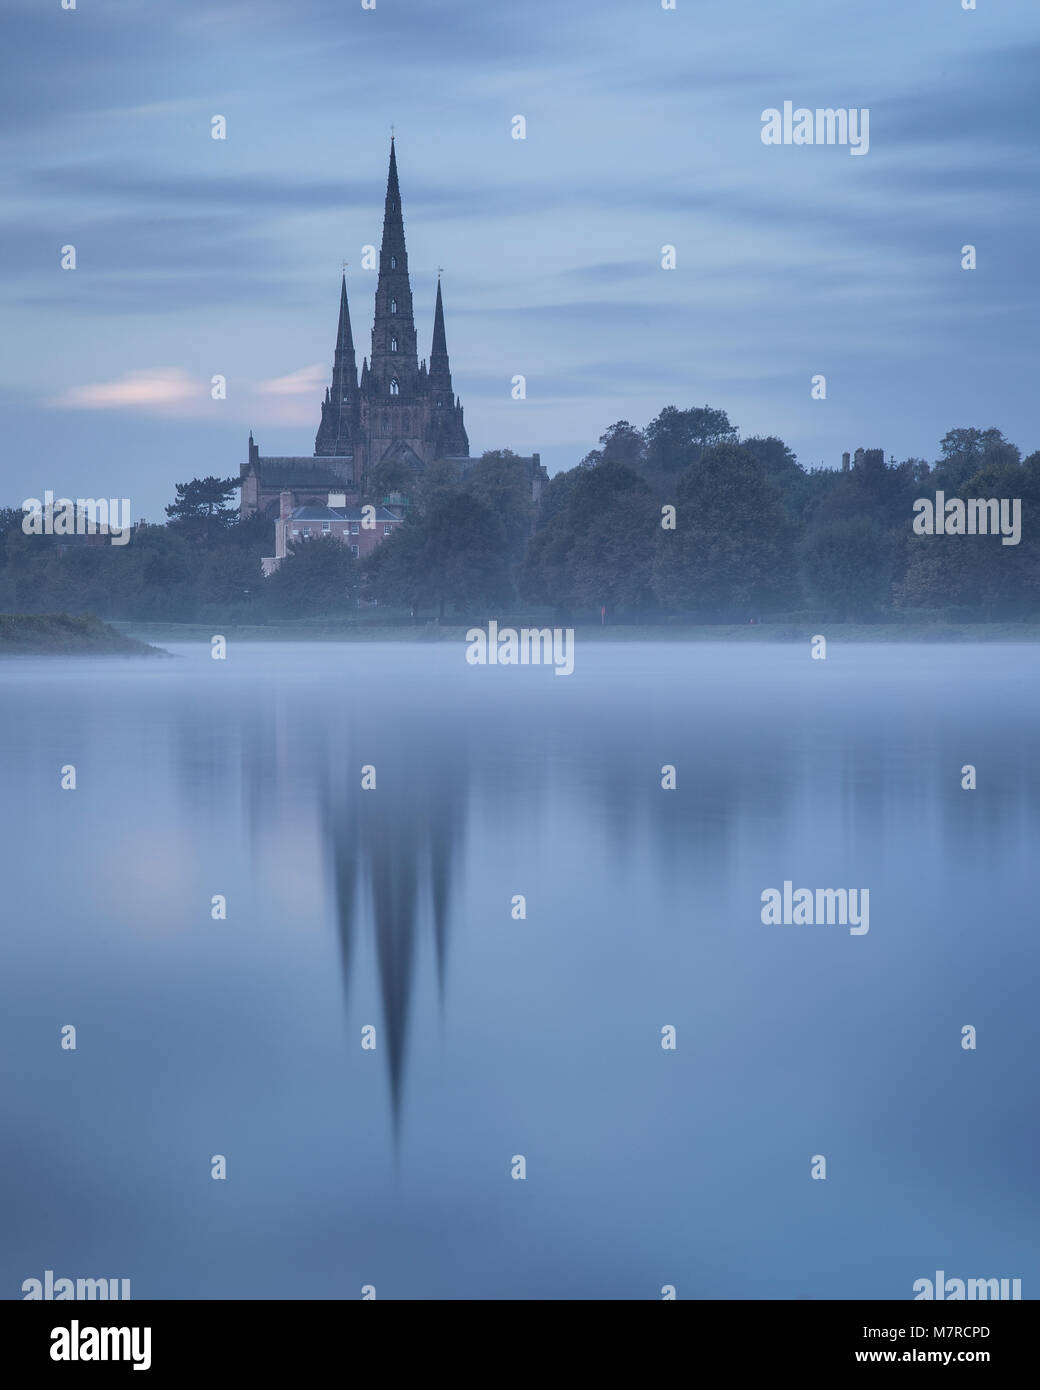 Lichfield cathedral and trees at dawn reflecting in misty lake Stock Photo